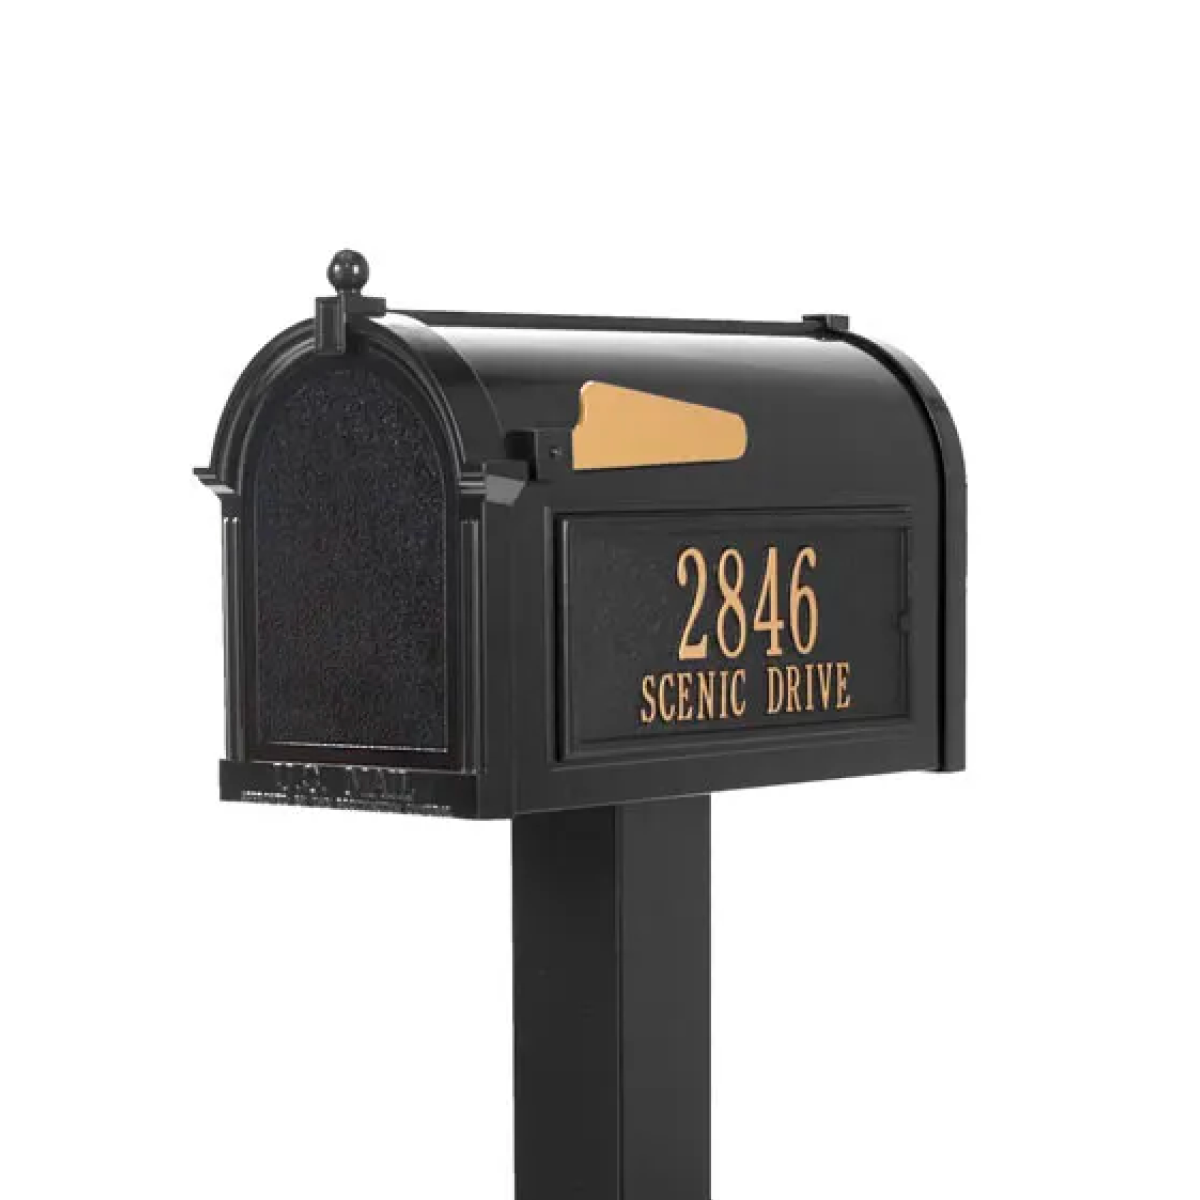 Whitehall Premium Capitol Mailbox Package Product Image